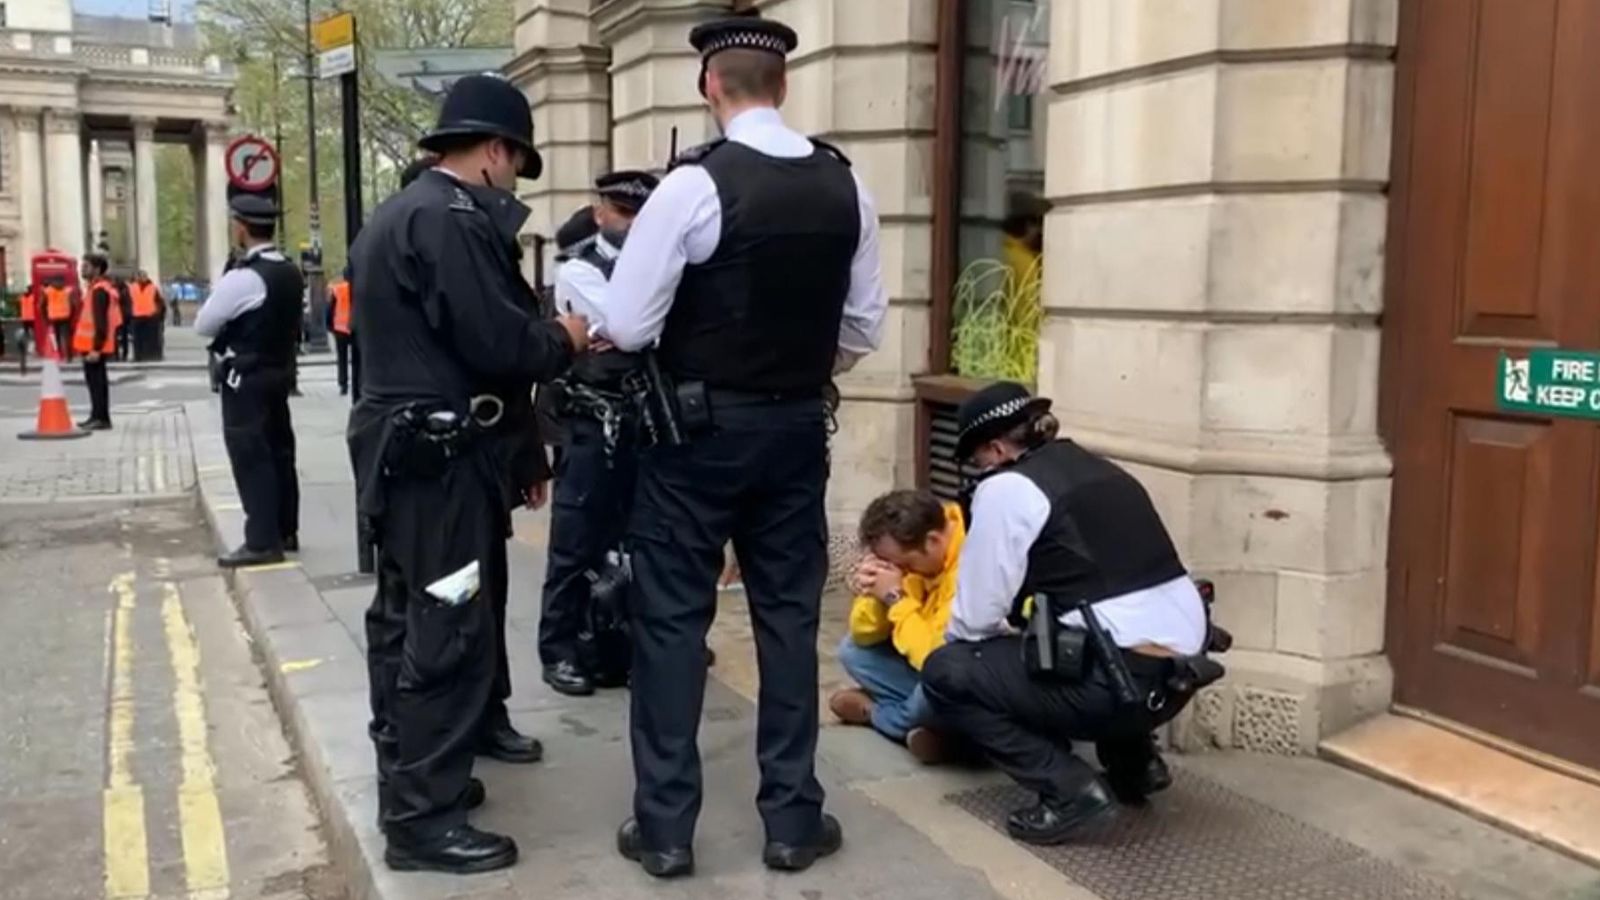 Coronation protesters arrest to be investigated by MPs